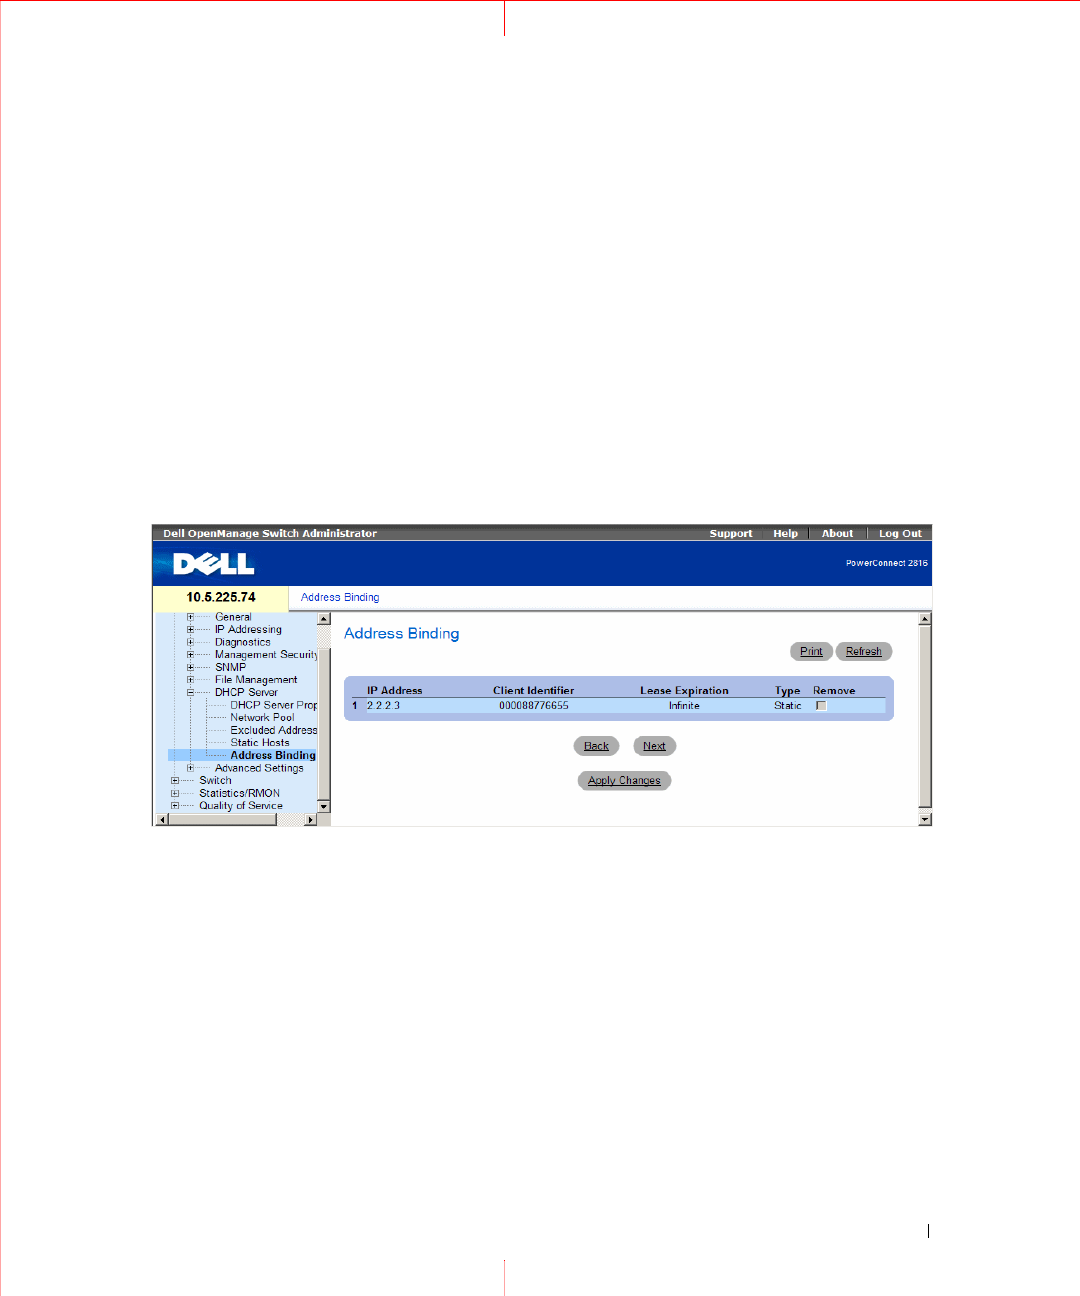 dell openmanage switch administrator software download